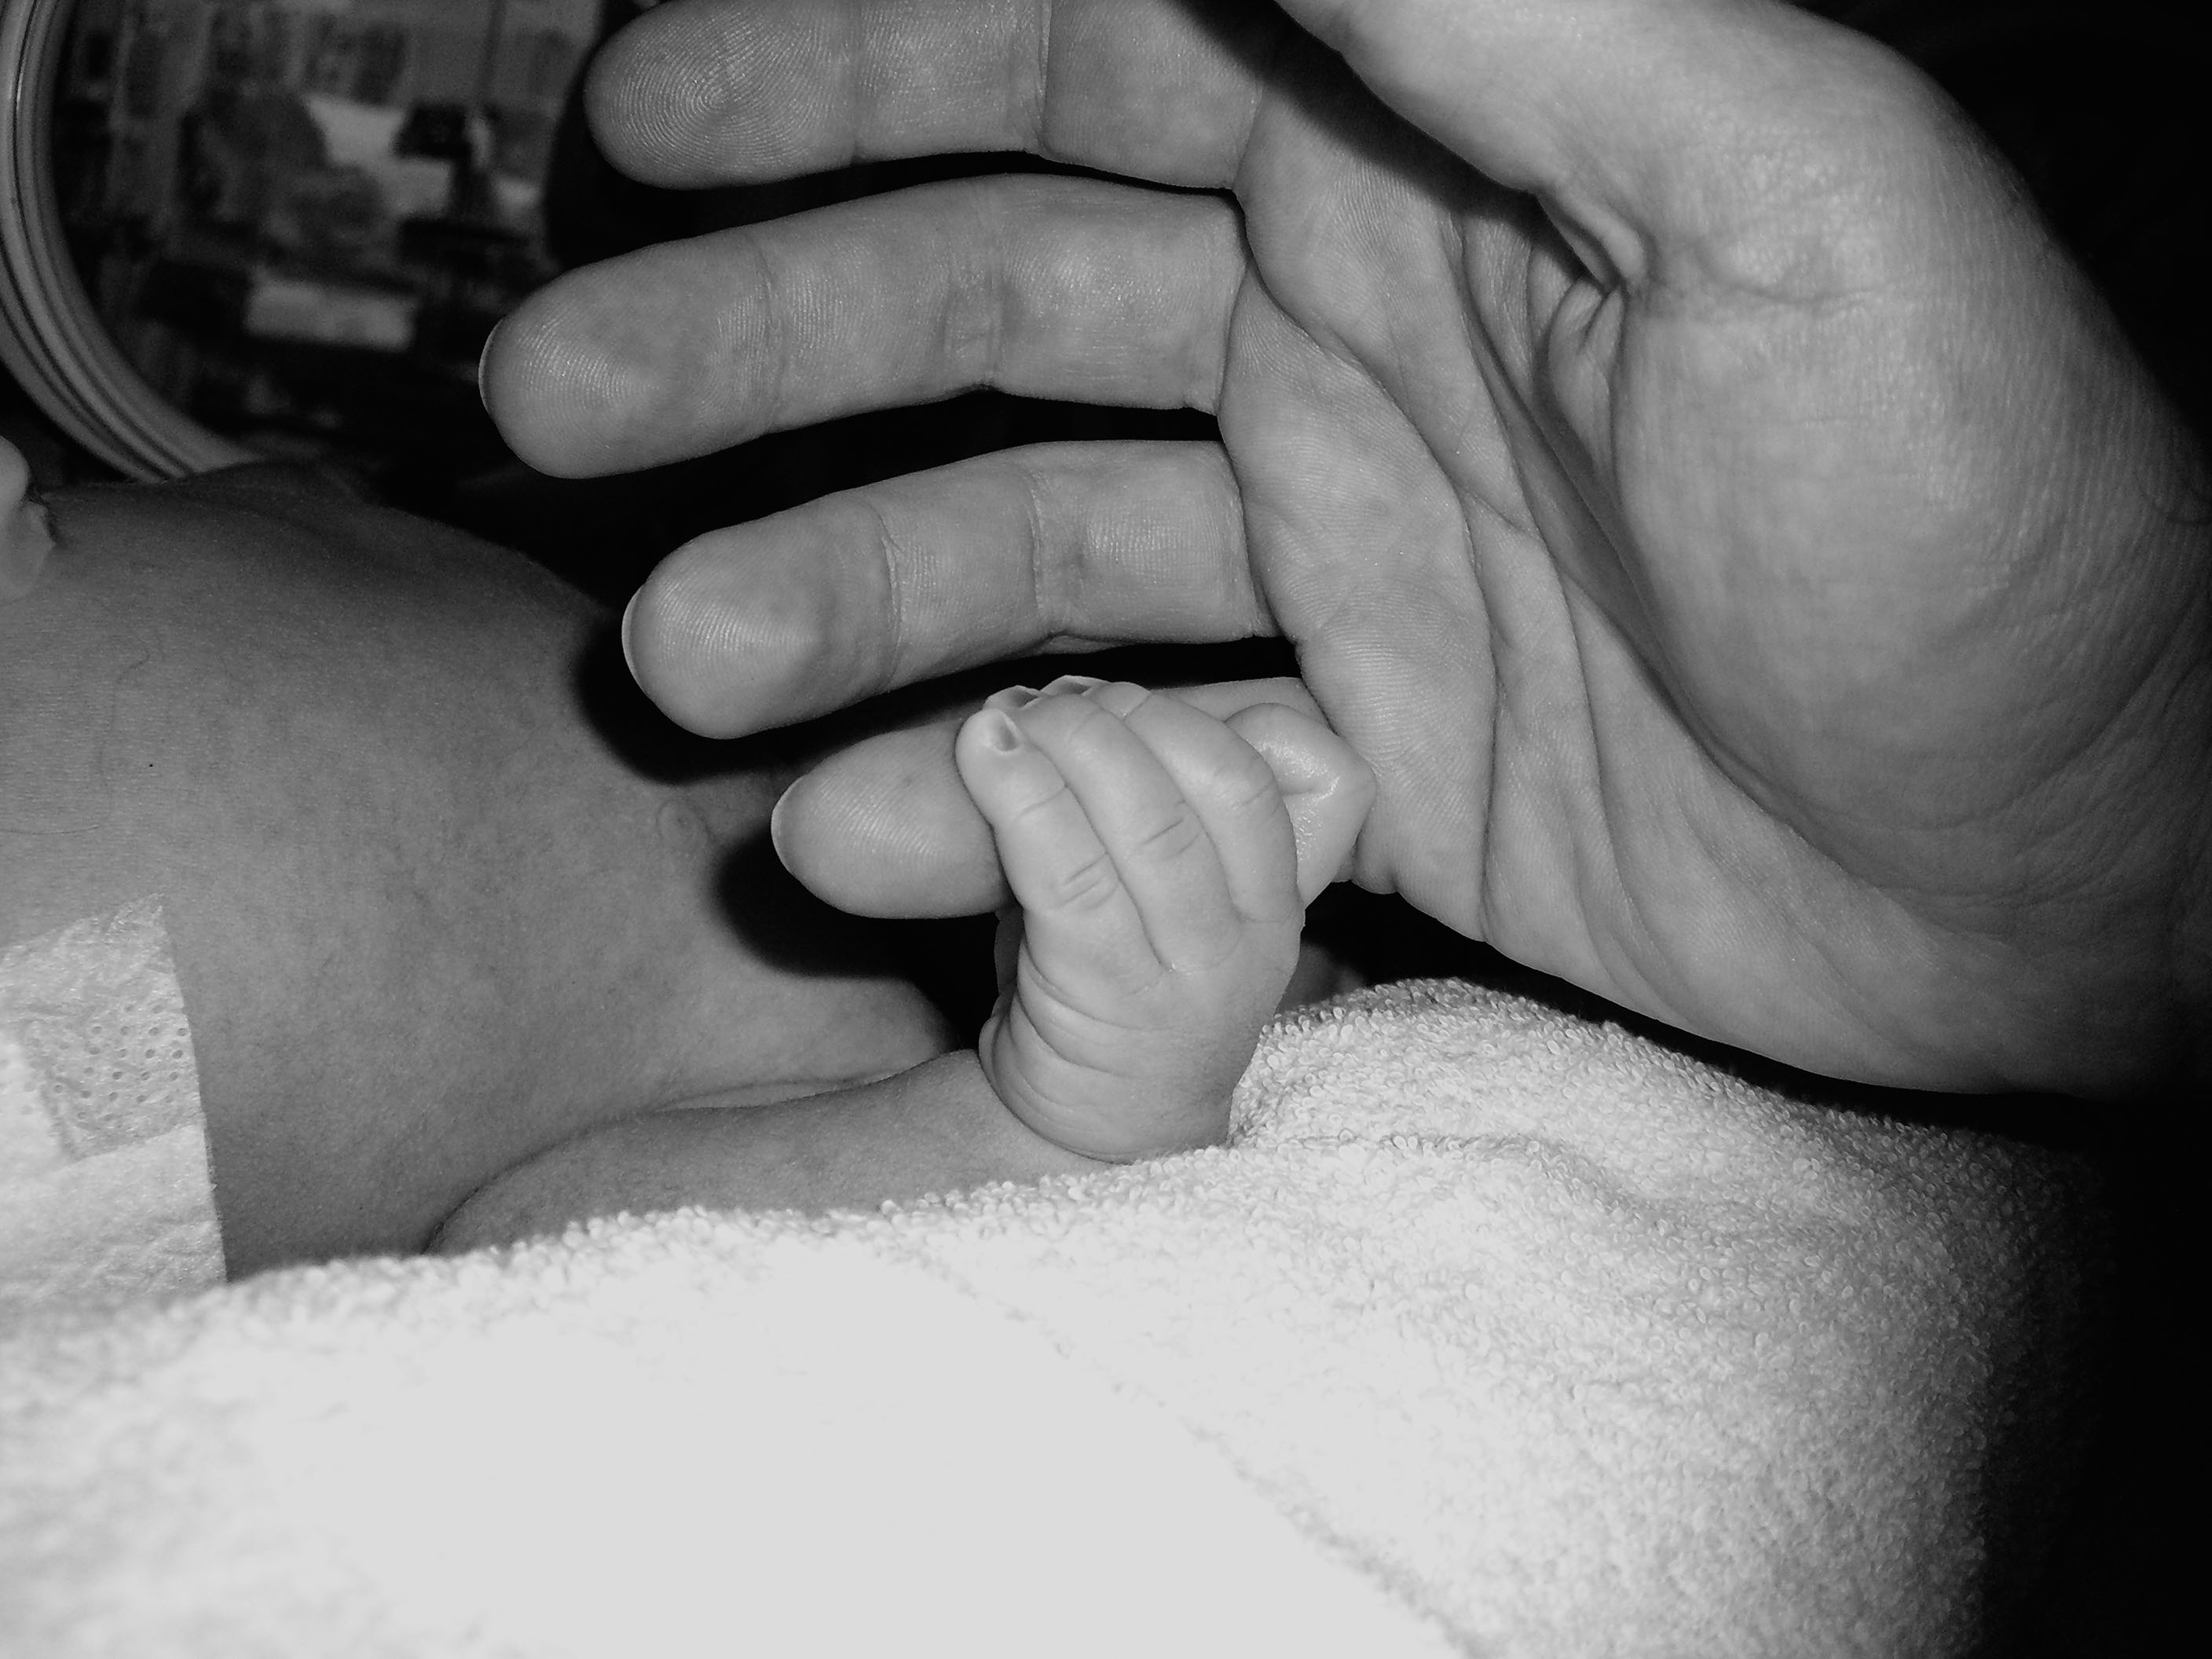 His hand holding onto mine in the nursery.